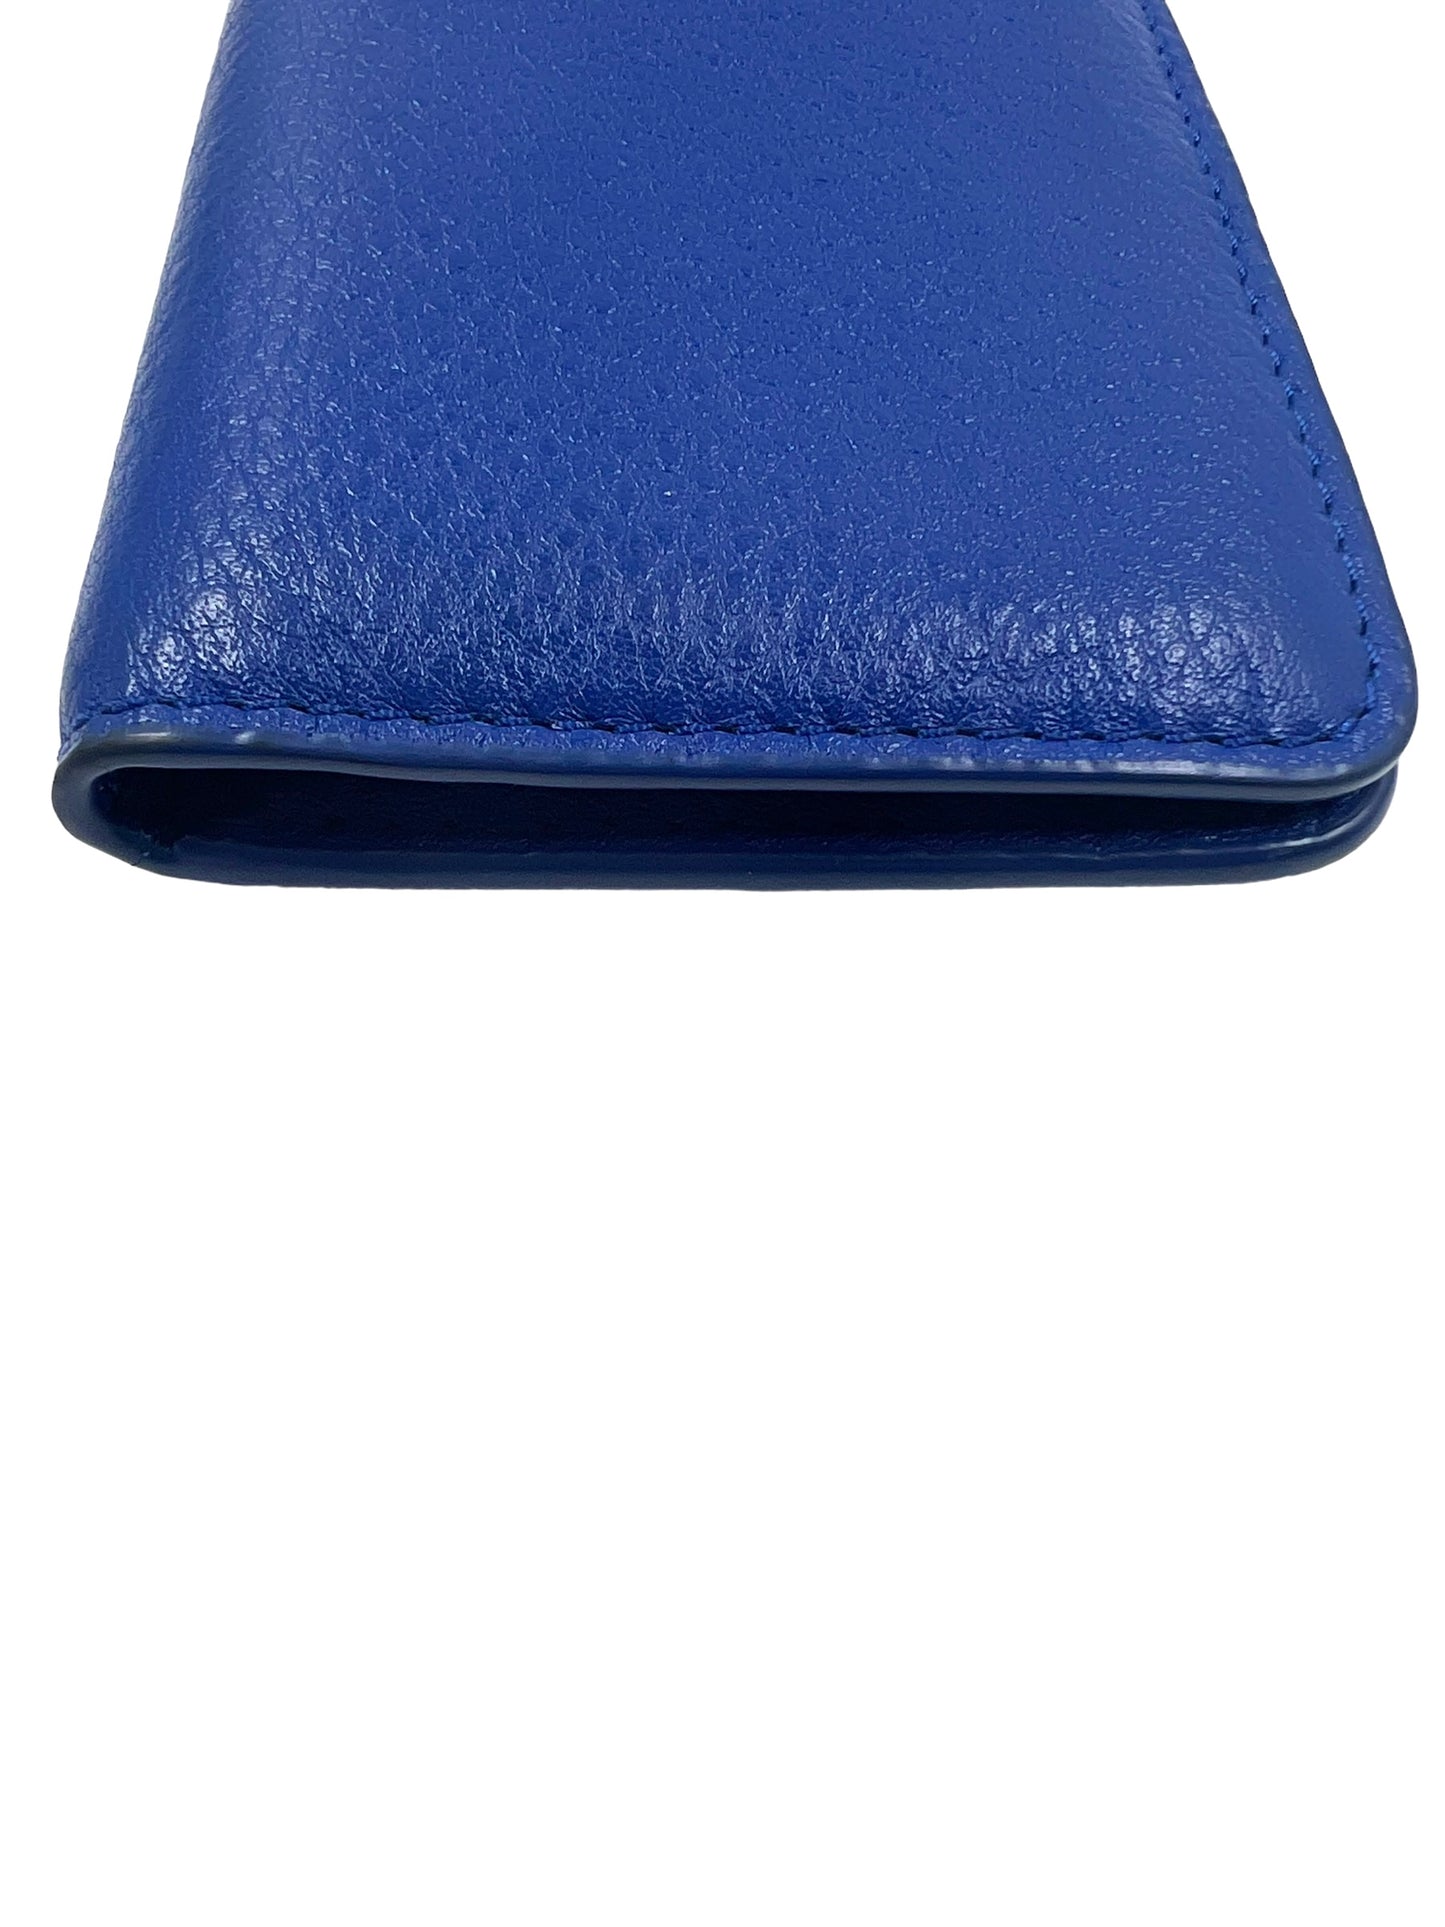 Tory Burch Blue Leather Cardholder